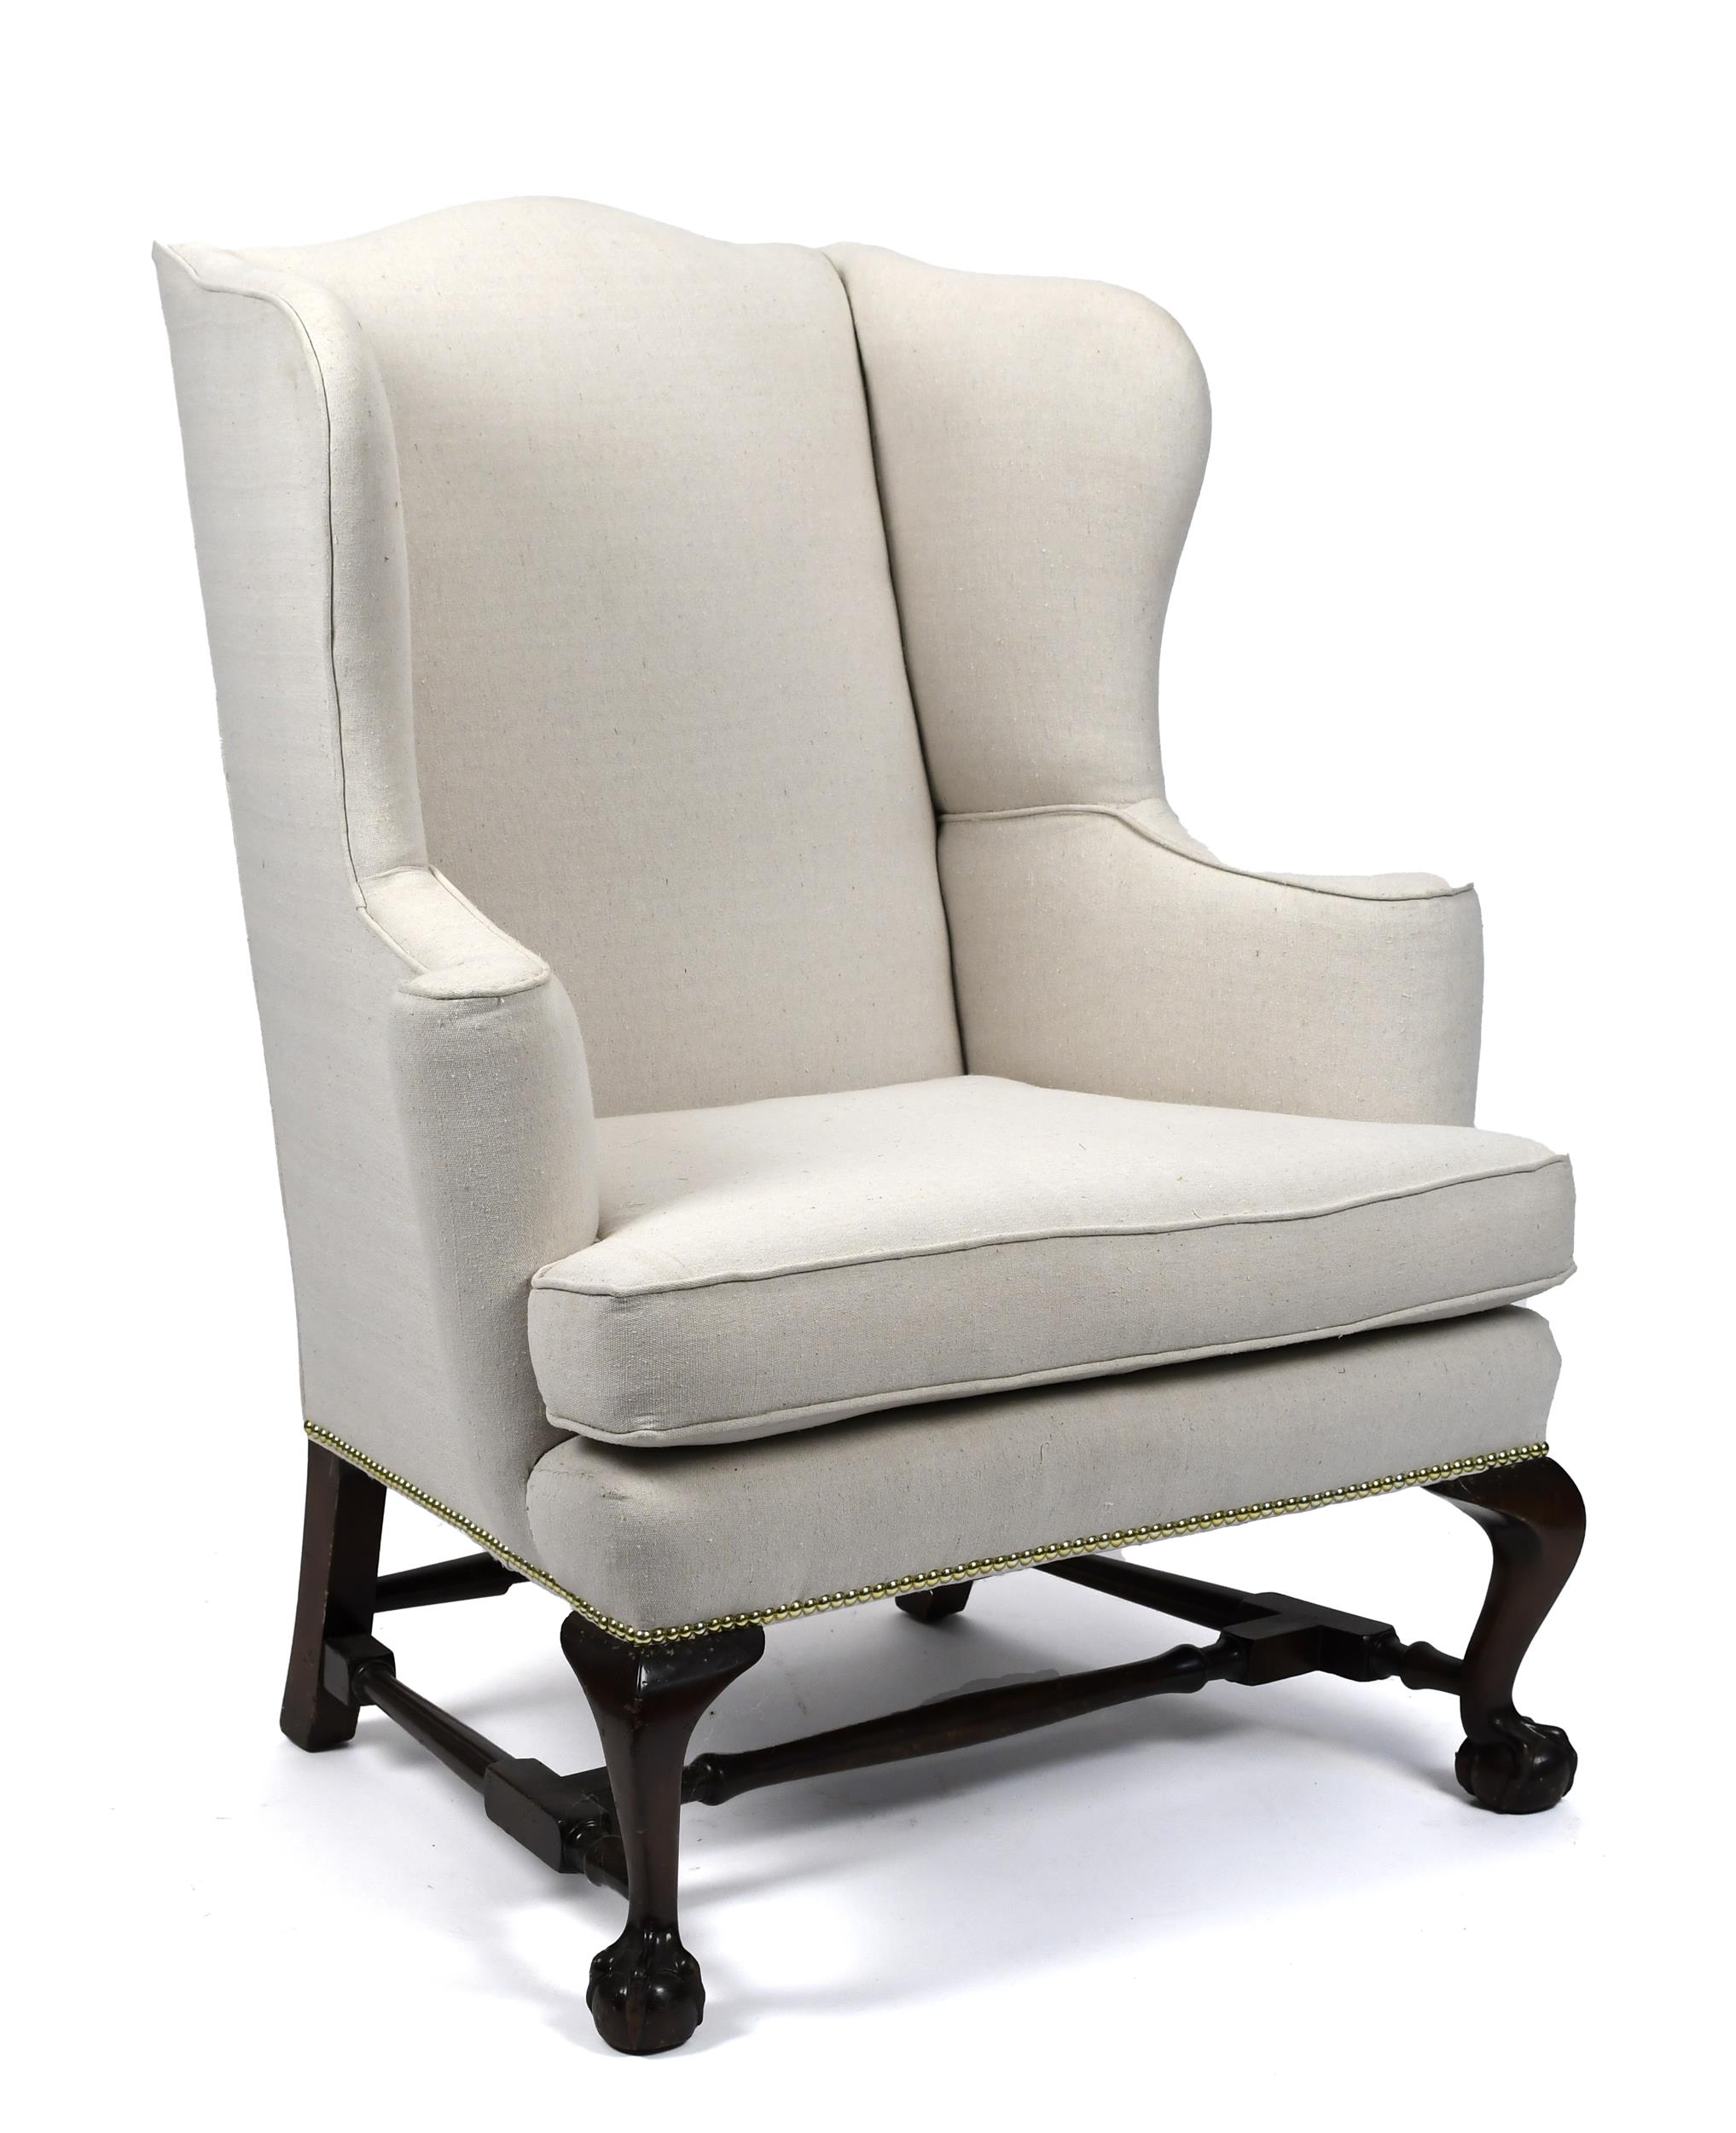 GOOD BOSTON CHIPPENDALE STYLE WING 307962